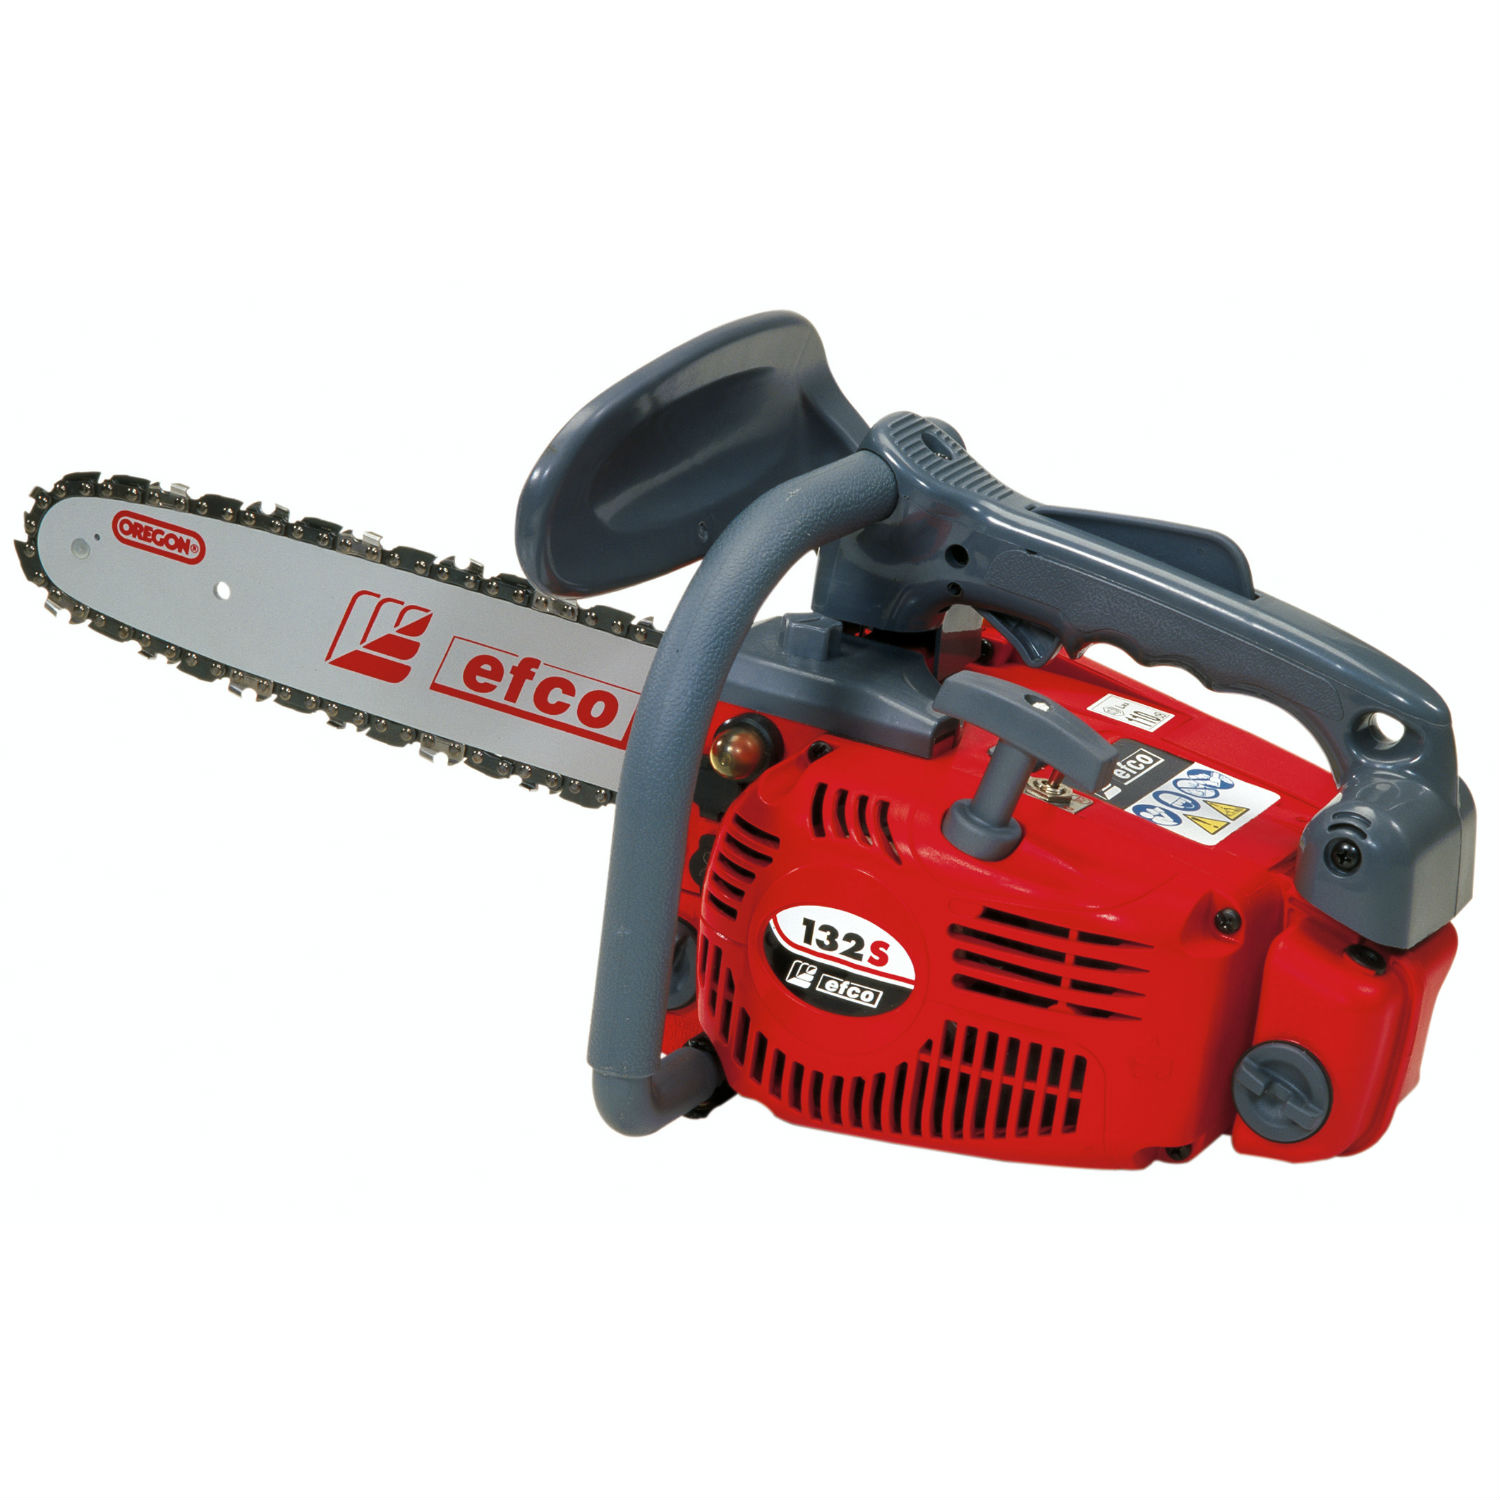 Efco MT-132S Professional Pruning Chainsaw (30cm Guide Bar)